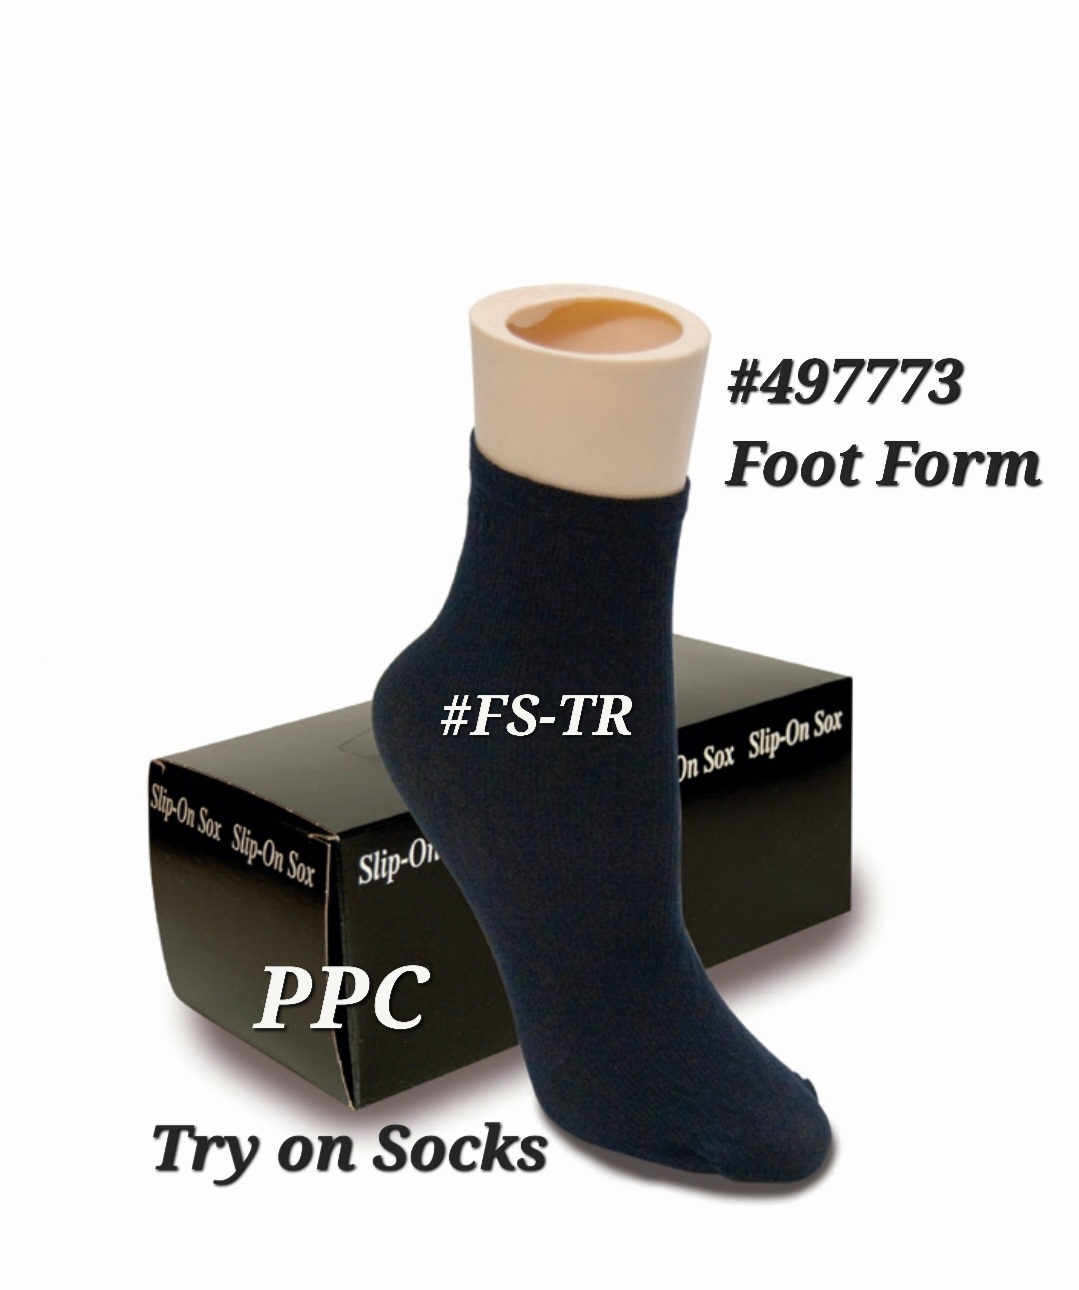 POLLY PRODUCTS COMPANY FOOT SOCKS/RIBBED AND LONG LENGTH OPTION #FS-TR AND #FS-TR/L. FOOT FORM #497773. MADE IN THE USA QUALITY 